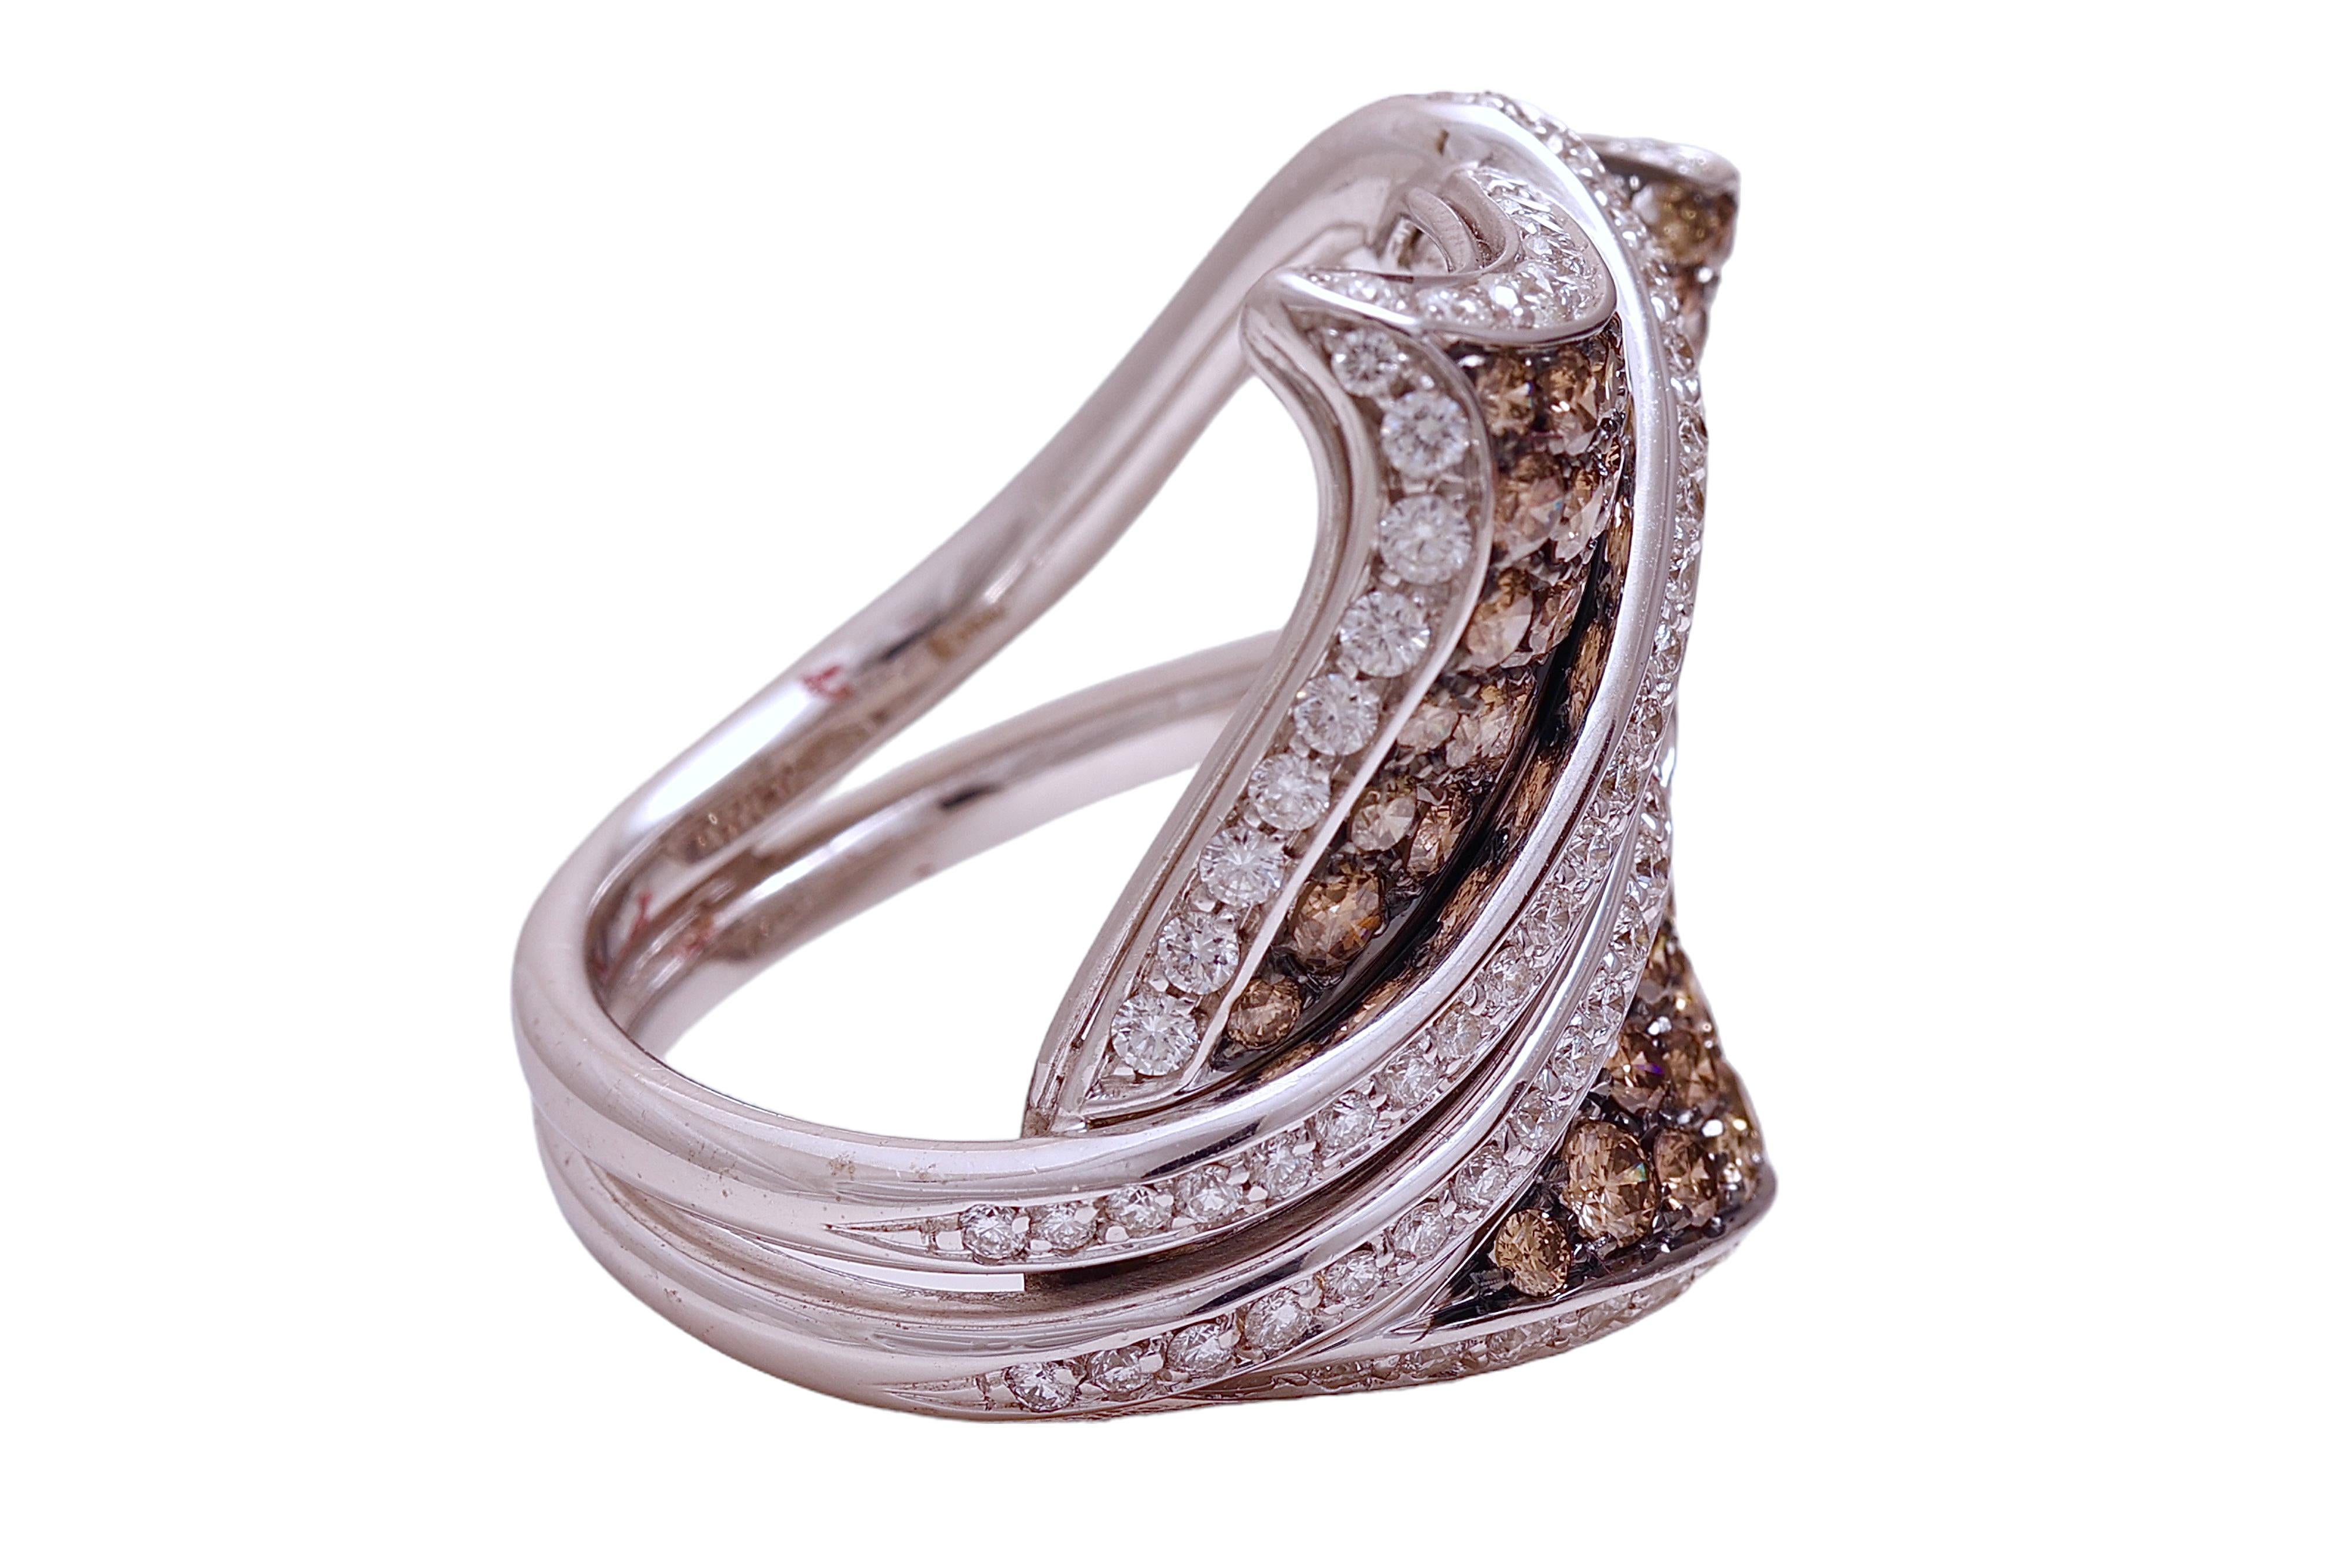 18kt White Gold Ring 1.65 ct. White & 2.2 ct Cognac Diamonds For Sale 4